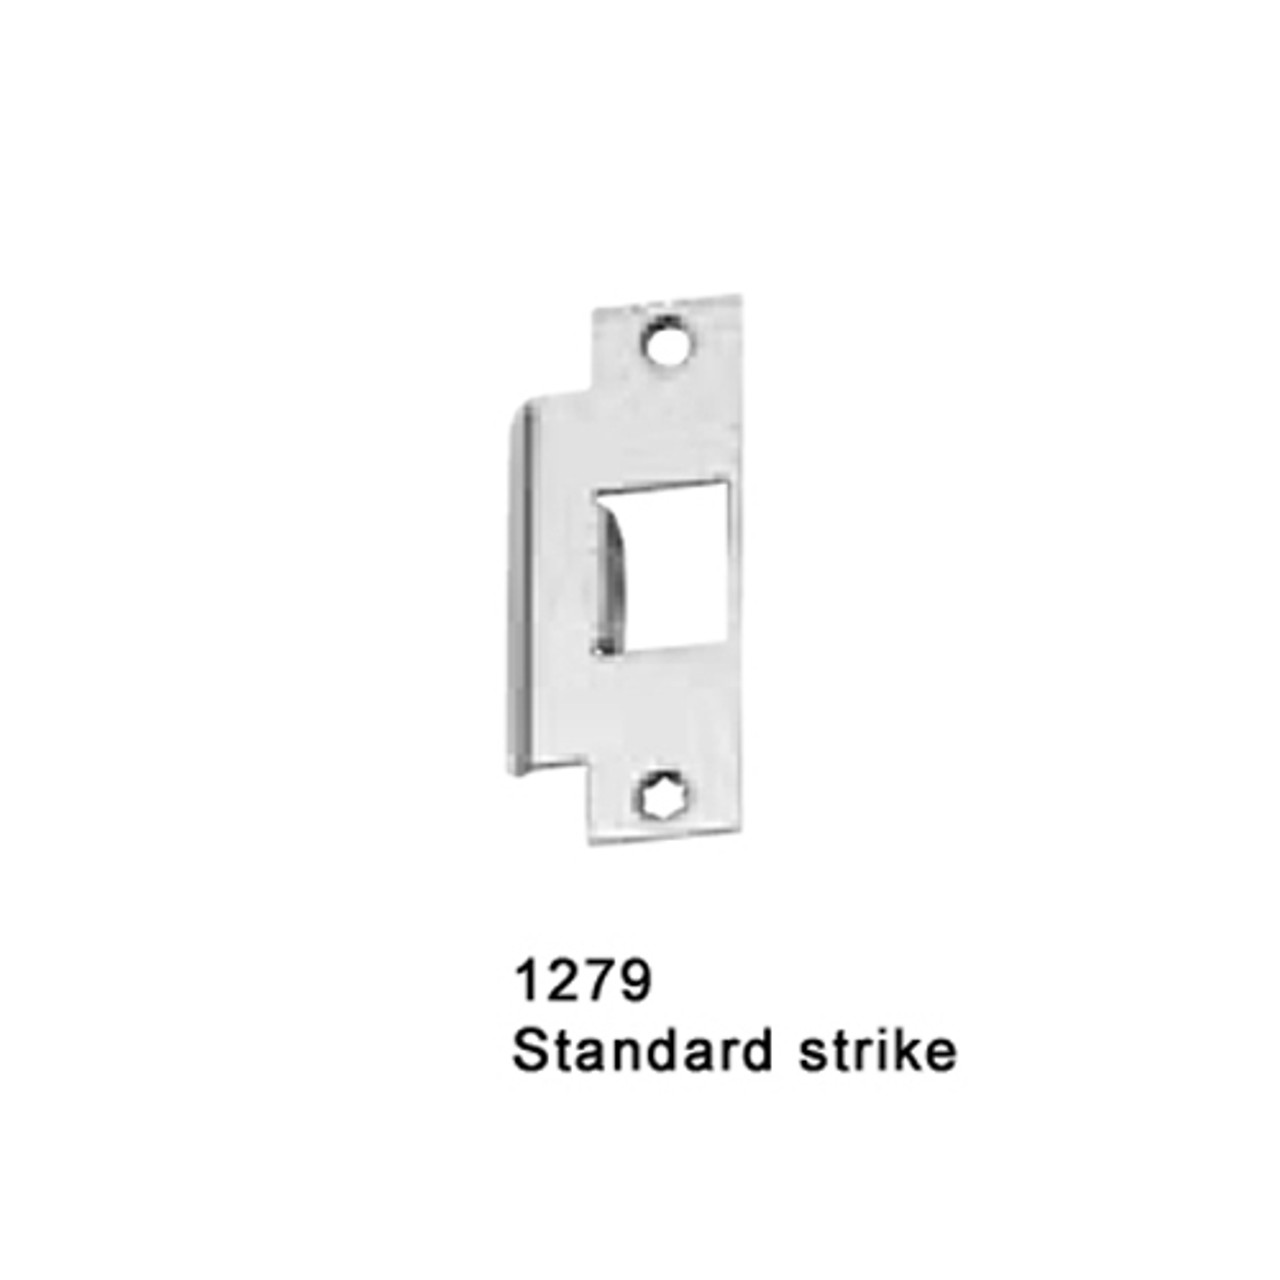 CD25-M-L-DT-DANE-US26-3-LHR Falcon 25 Series Mortise Lock Devices 510L-DT Dane Lever Trim with Dummy Trim in Polished Chrome